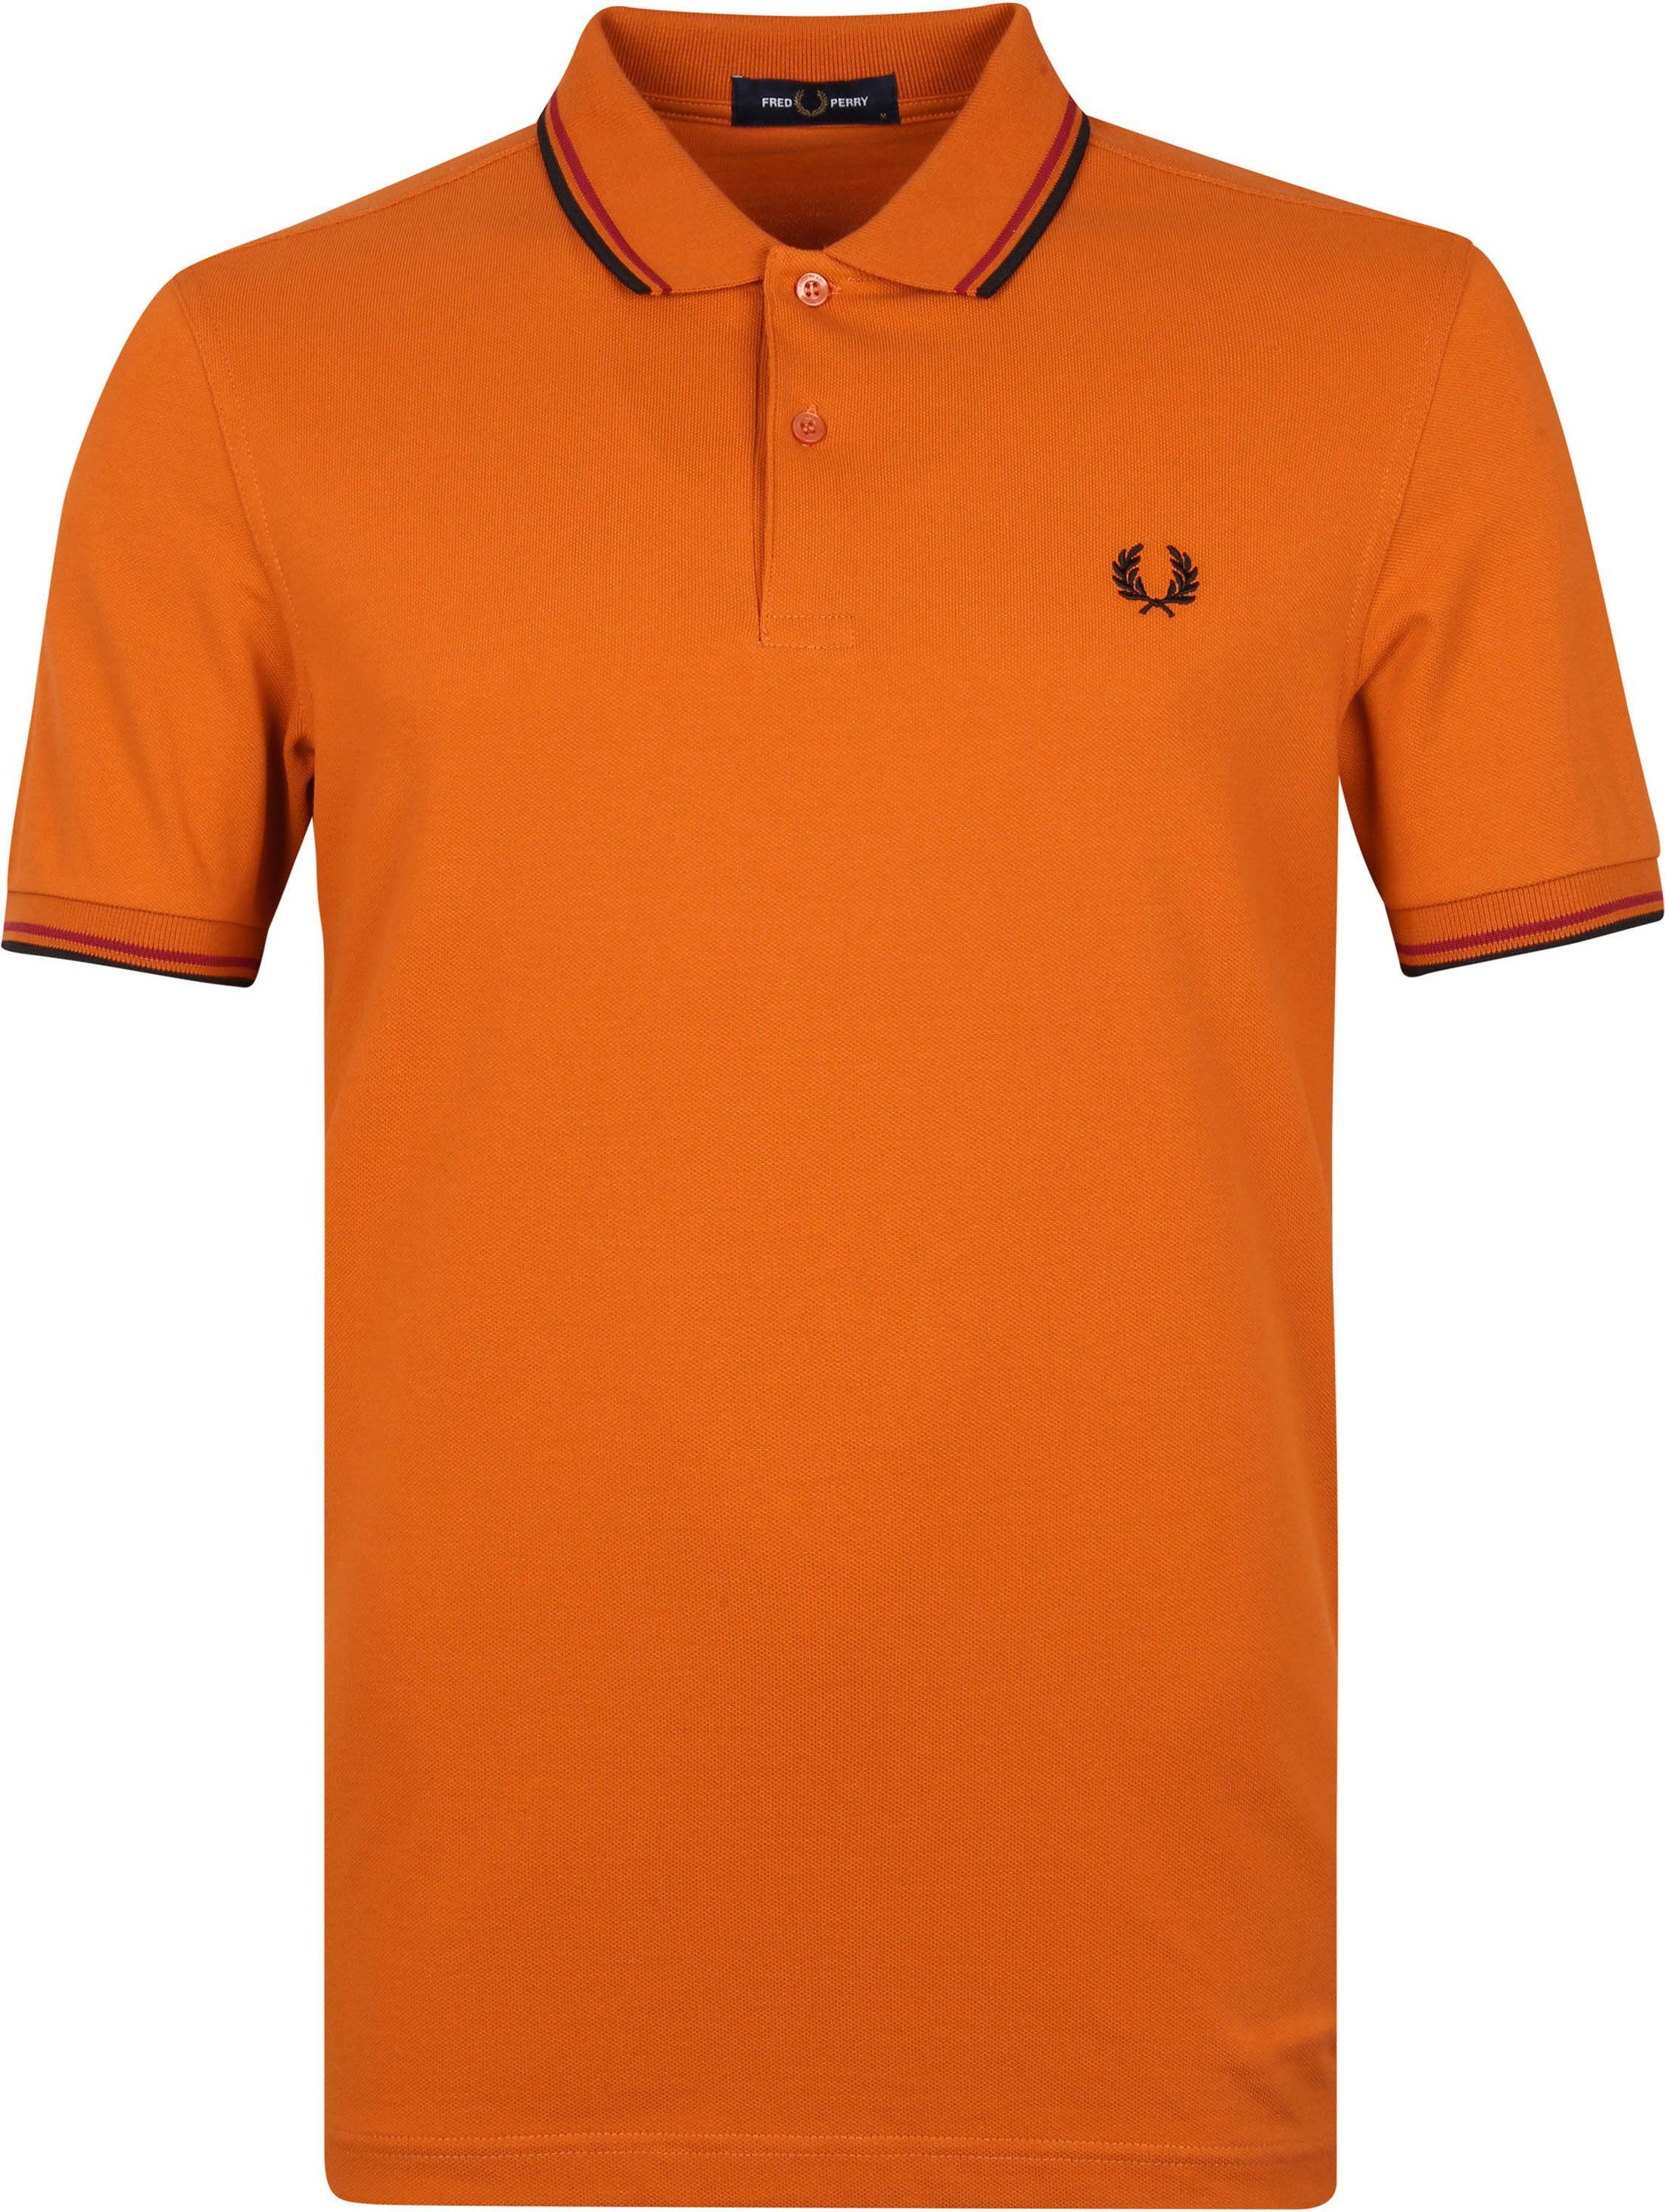 Fred Perry Polo Shirt M3600 Orange size M